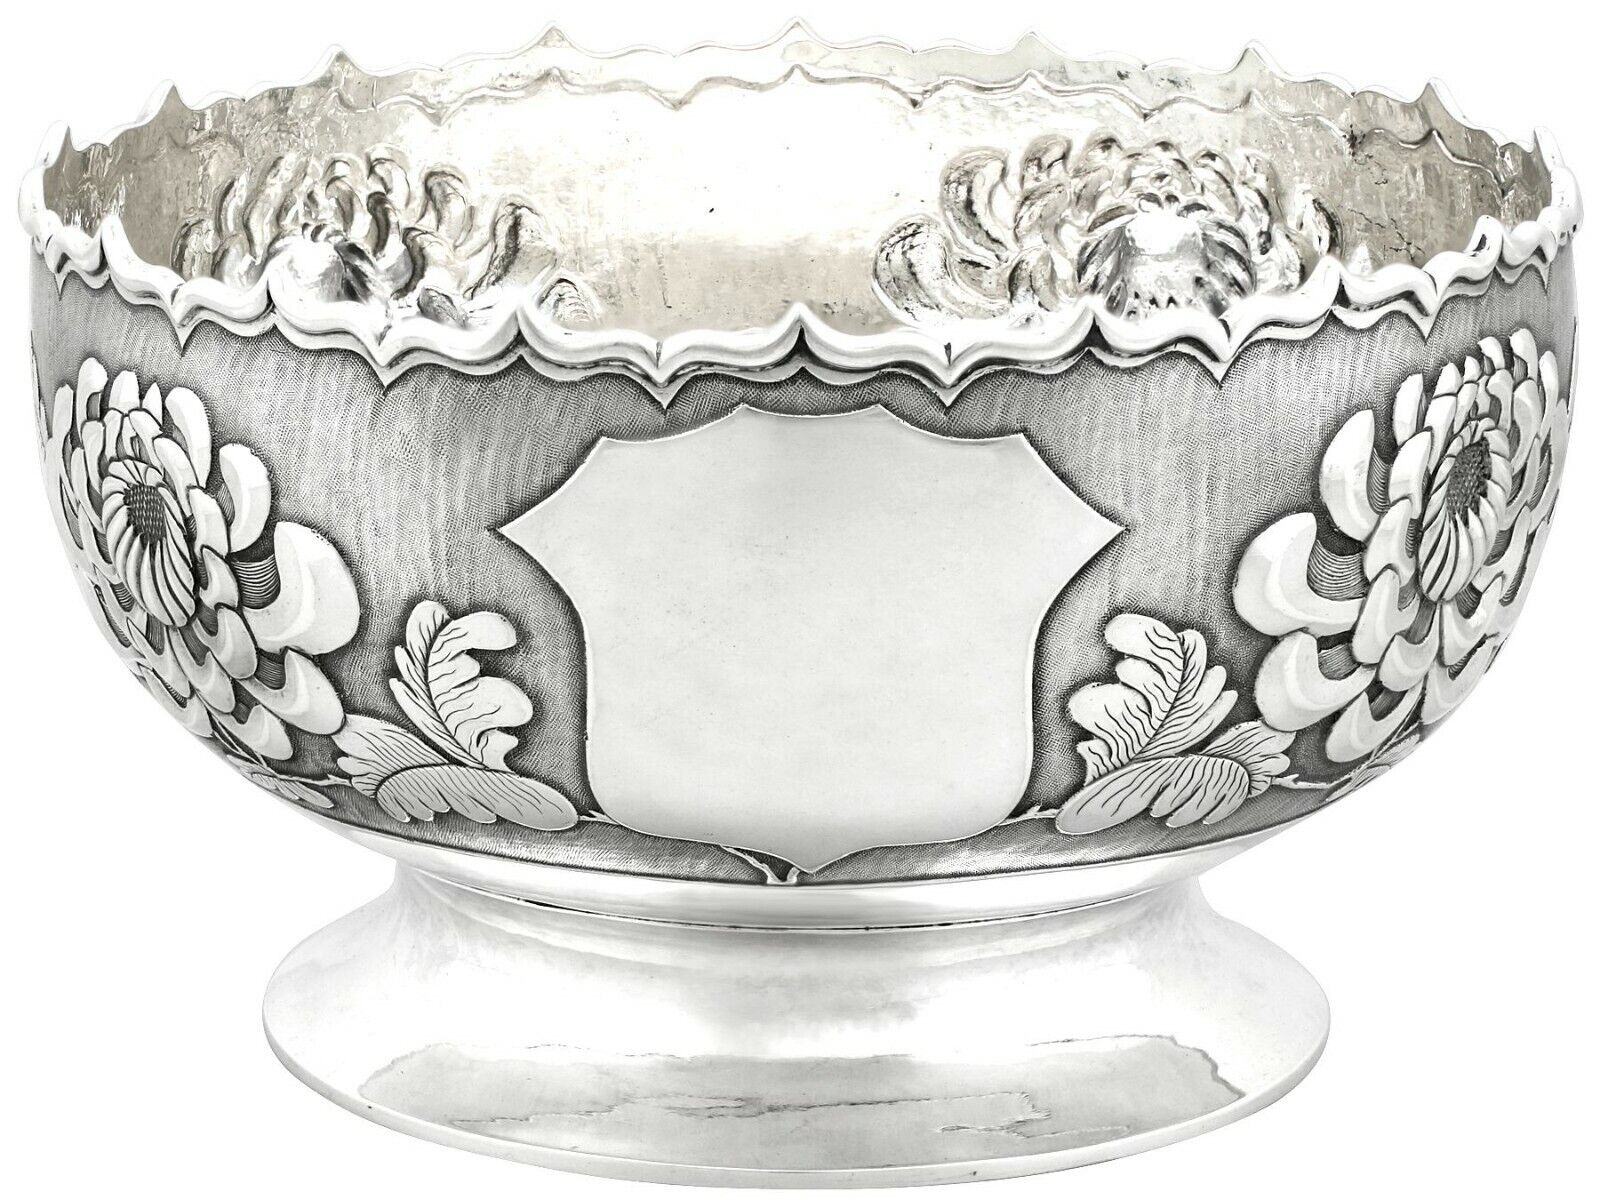 Antique 1900s Chinese Export Silver Bowl Height 10.6cm 582g